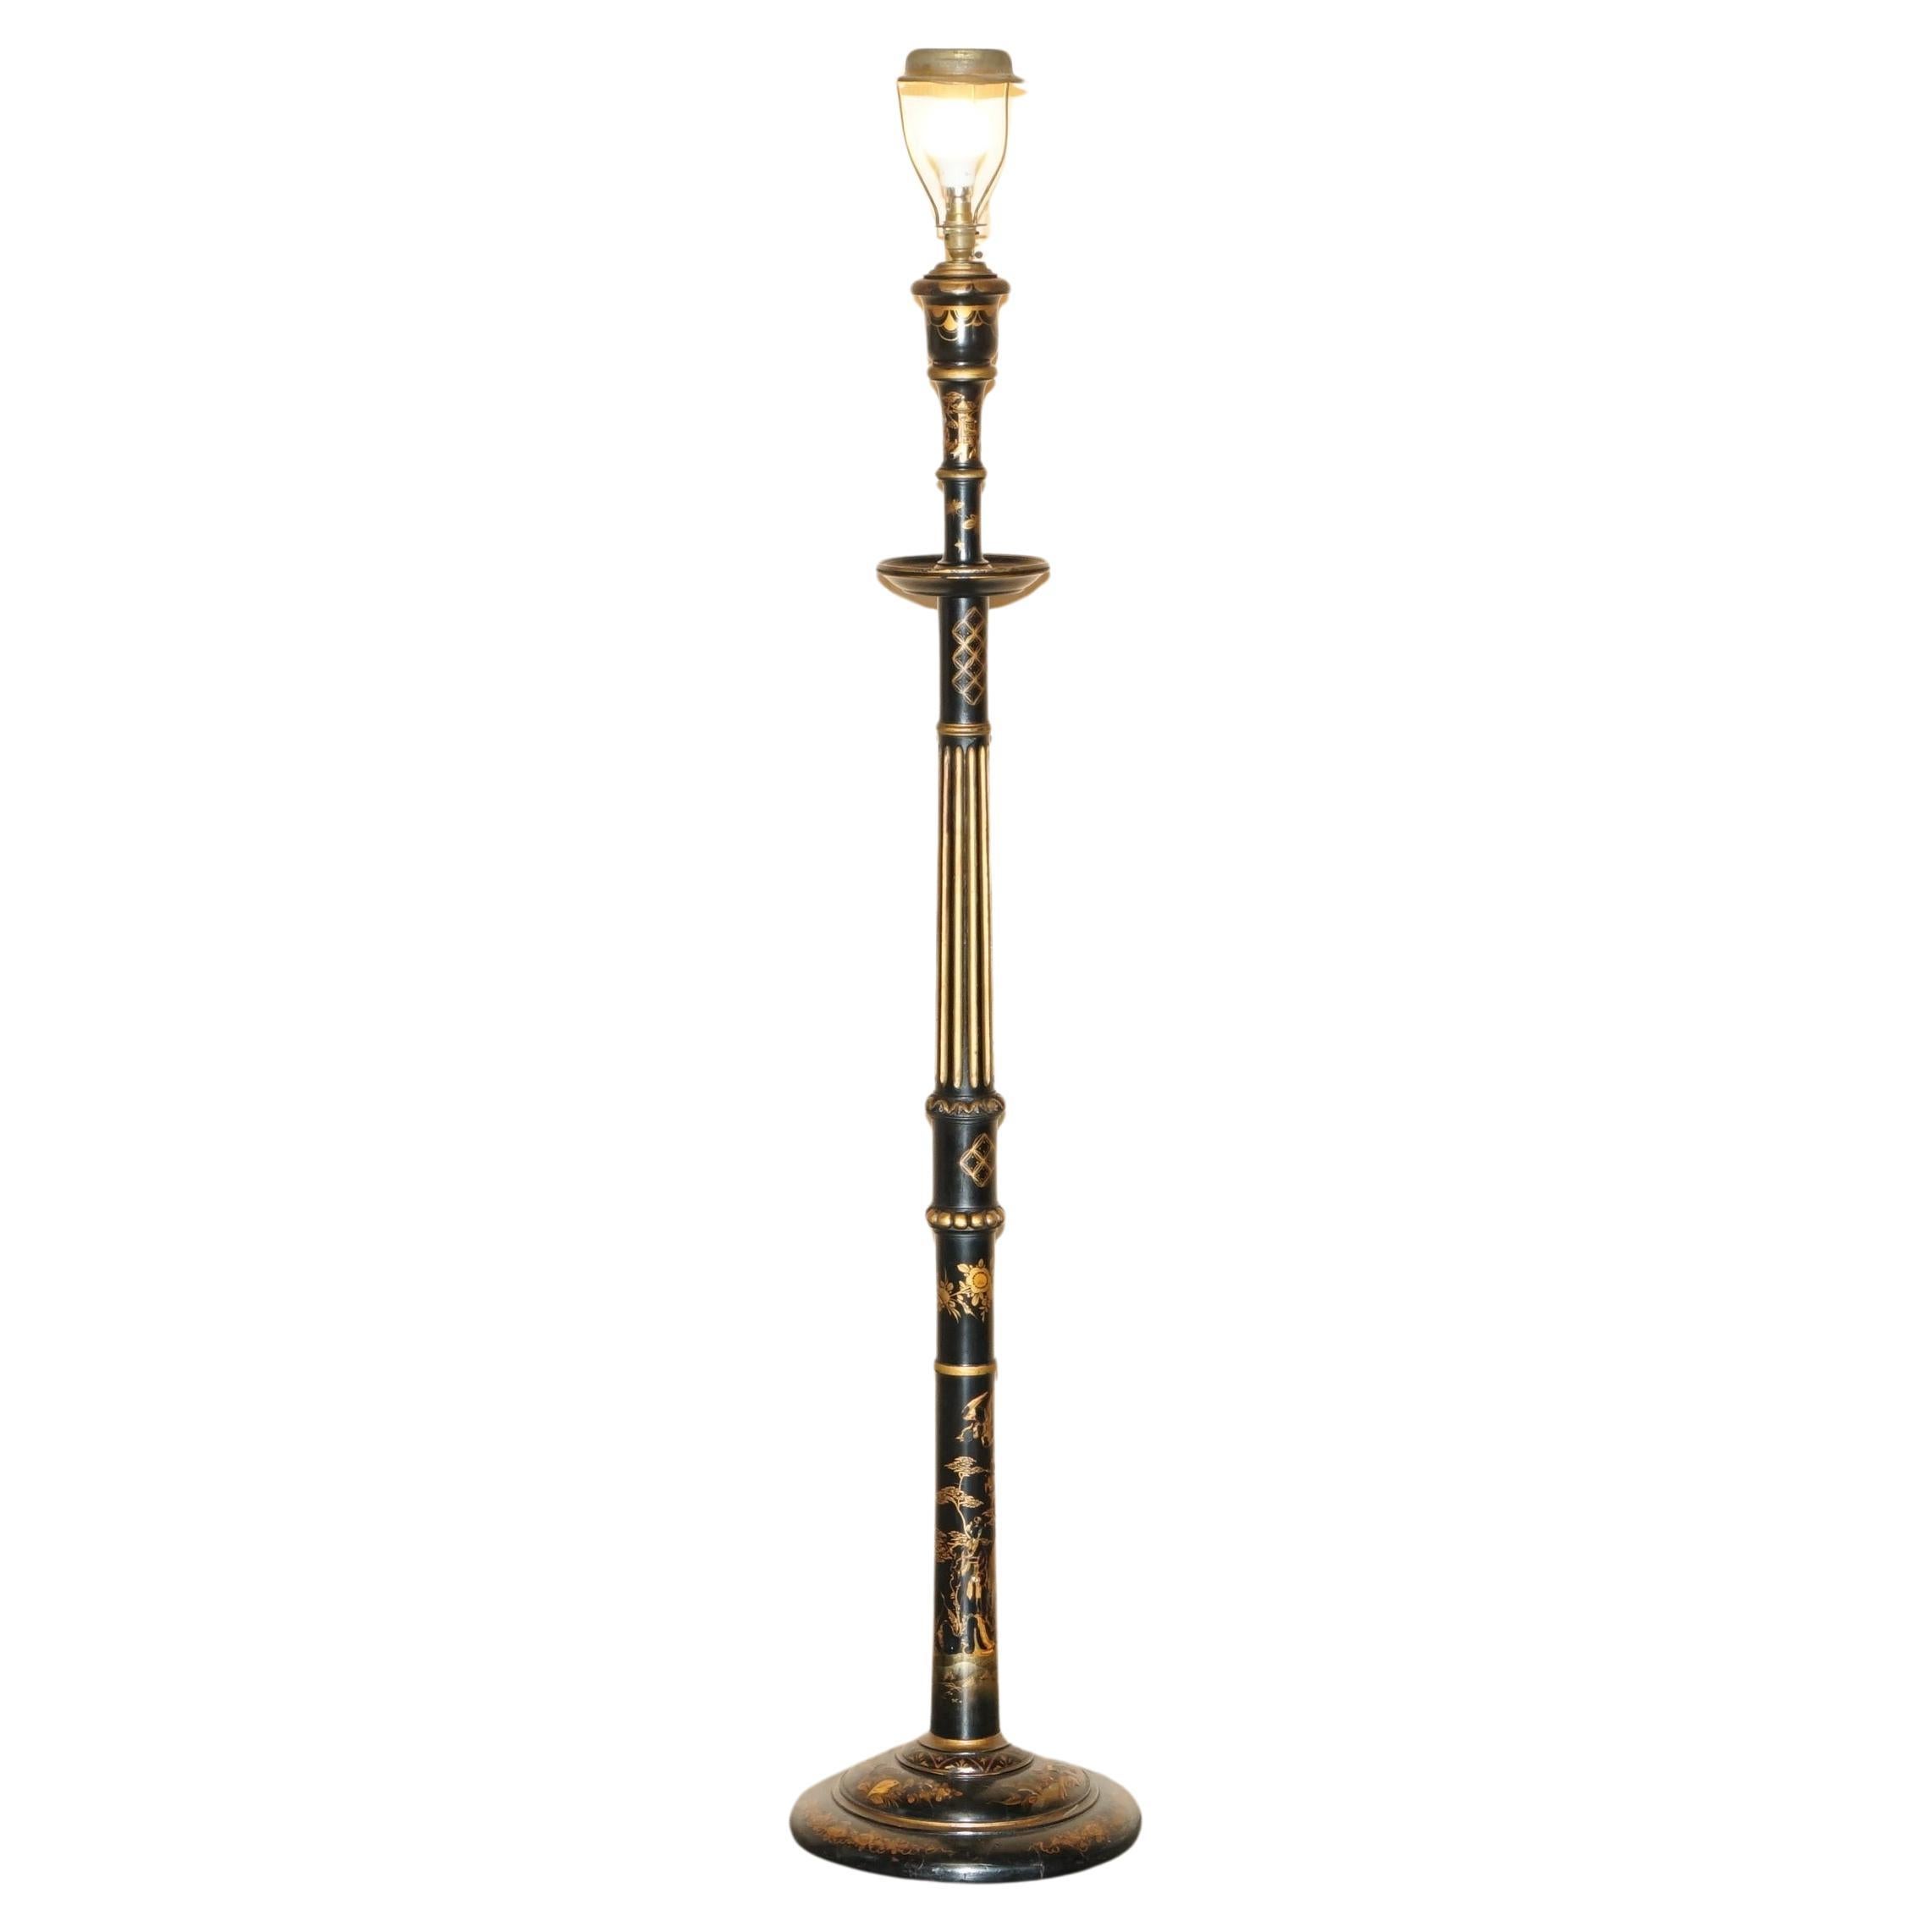 We are delighted to offer for sale this very rare hand painted and lacquered Chinese Export circa 1920's Chinoiserie floor standing lamp

I have two of these with slightly different finishes, the other is listed under my other items 

The lamp has